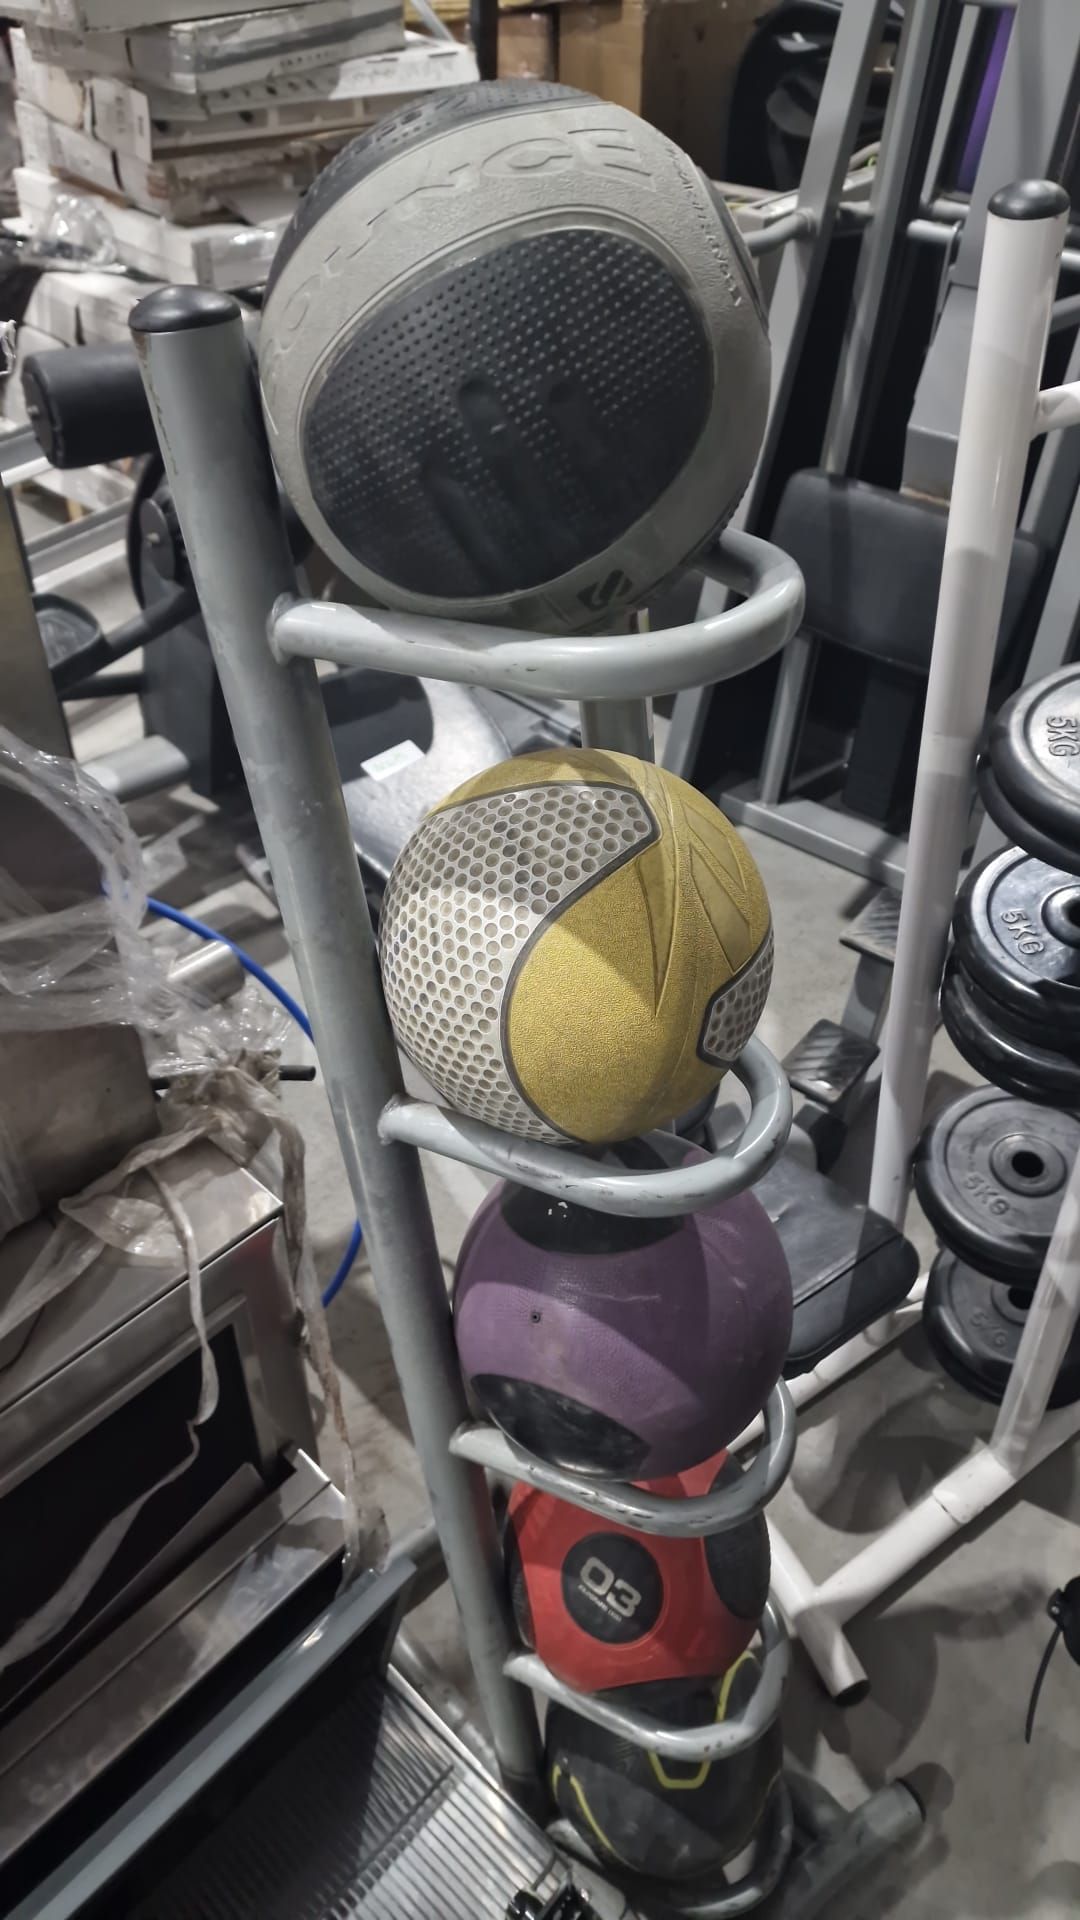 Stand with Various Exercise Balls - Image 3 of 4